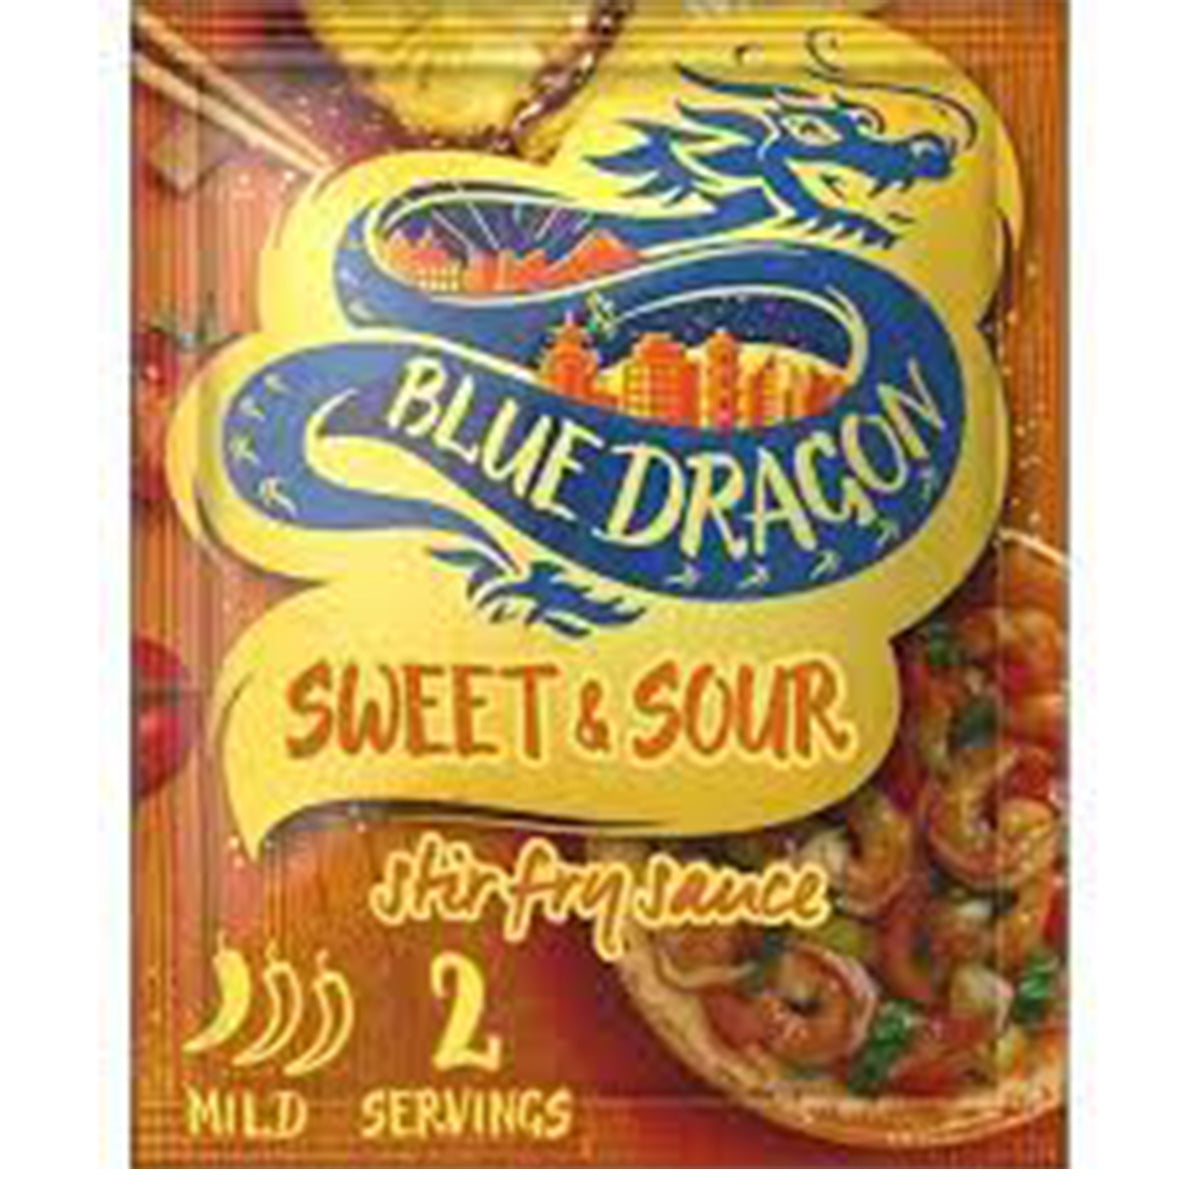 Blue Dragon - Sweet&Sour Sauce - 120g product is the Blue Dragon sweet & sour sauce.